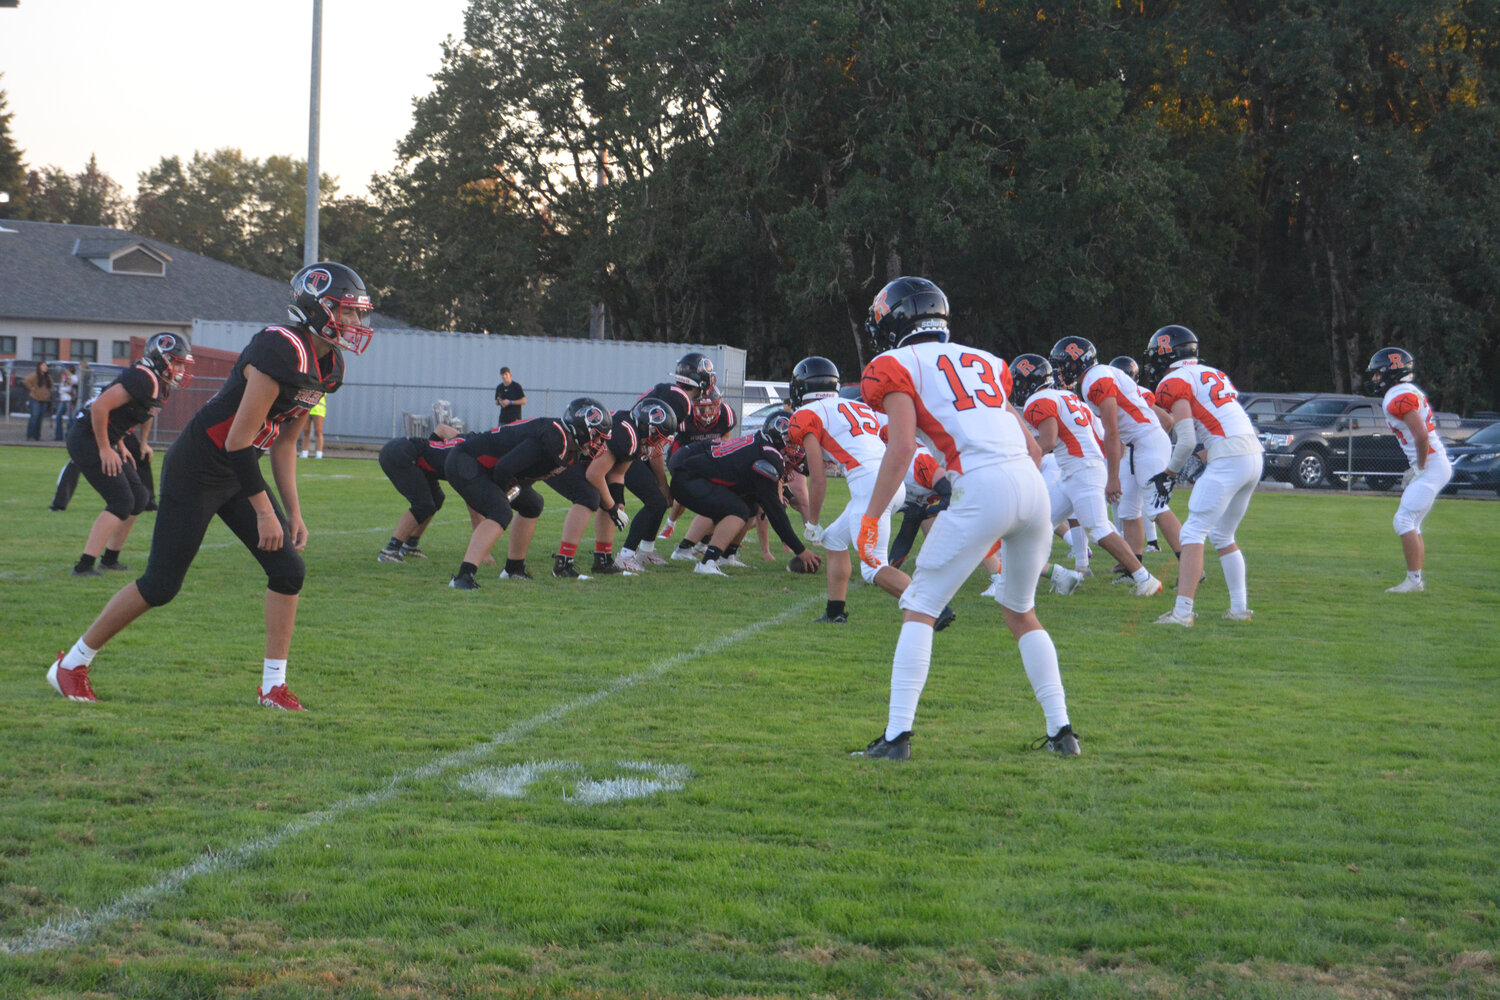 The Mountaineers defense prepares for a snap against Toledo at Toledo High School on Sept. 8.